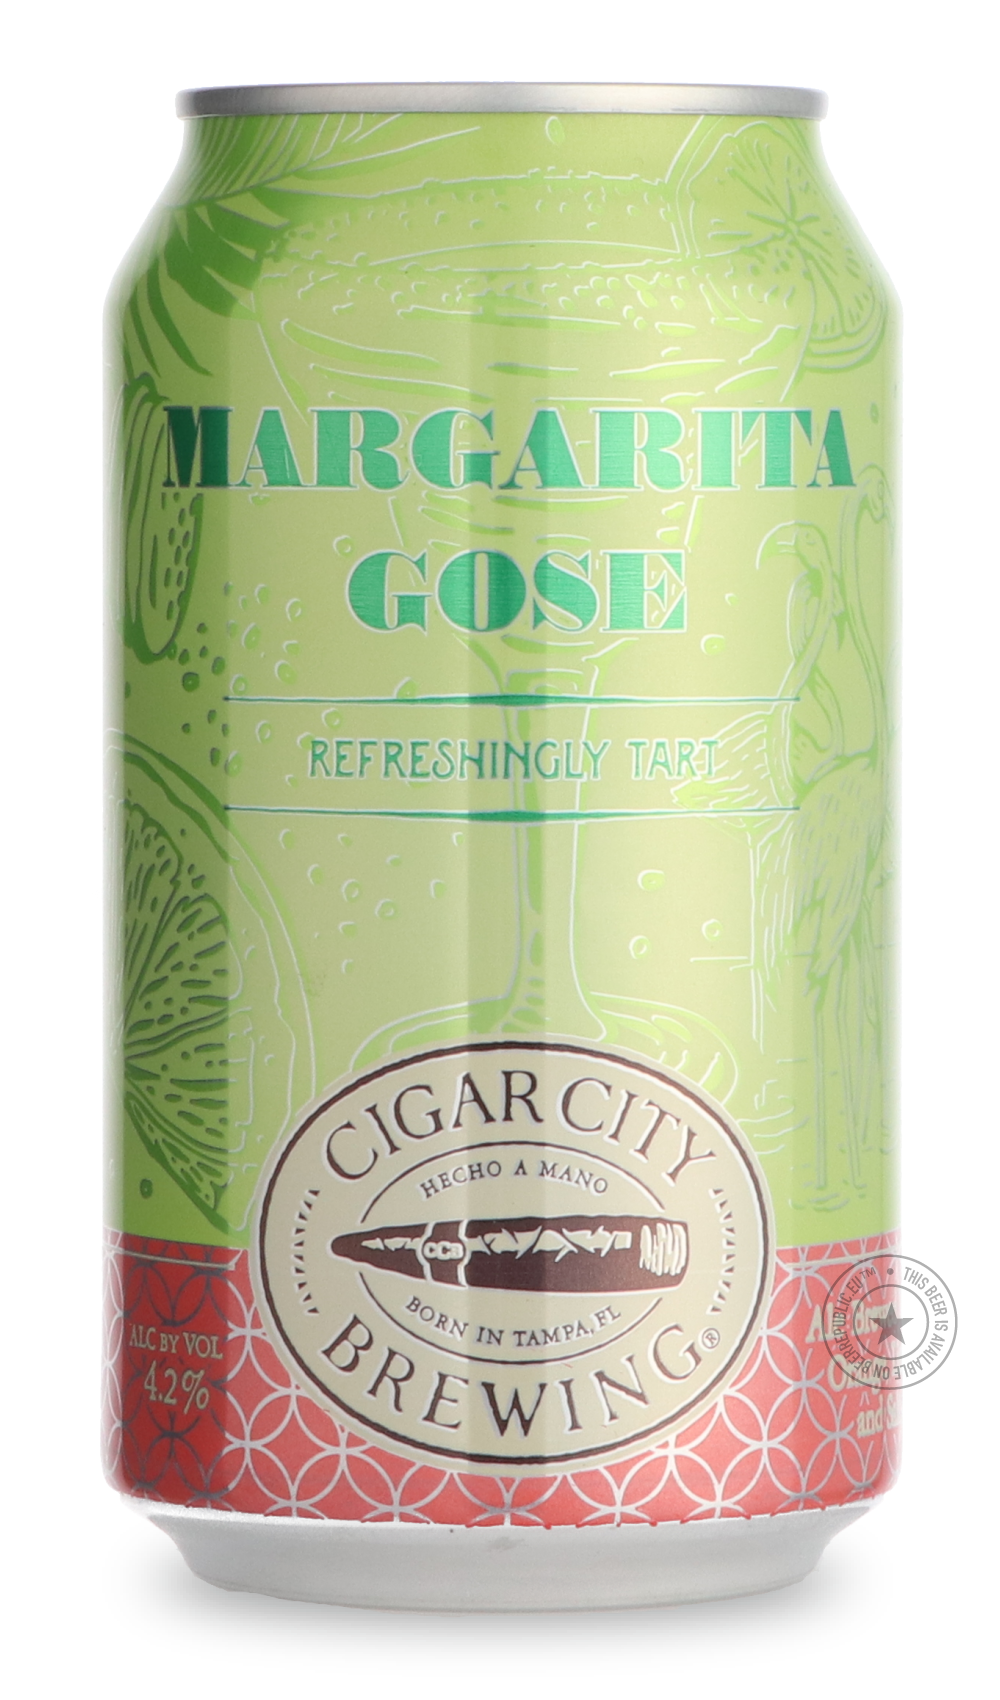 -Cigar City- Margarita Gose-Sour / Wild & Fruity- Only @ Beer Republic - The best online beer store for American & Canadian craft beer - Buy beer online from the USA and Canada - Bier online kopen - Amerikaans bier kopen - Craft beer store - Craft beer kopen - Amerikanisch bier kaufen - Bier online kaufen - Acheter biere online - IPA - Stout - Porter - New England IPA - Hazy IPA - Imperial Stout - Barrel Aged - Barrel Aged Imperial Stout - Brown - Dark beer - Blond - Blonde - Pilsner - Lager - Wheat - Weize